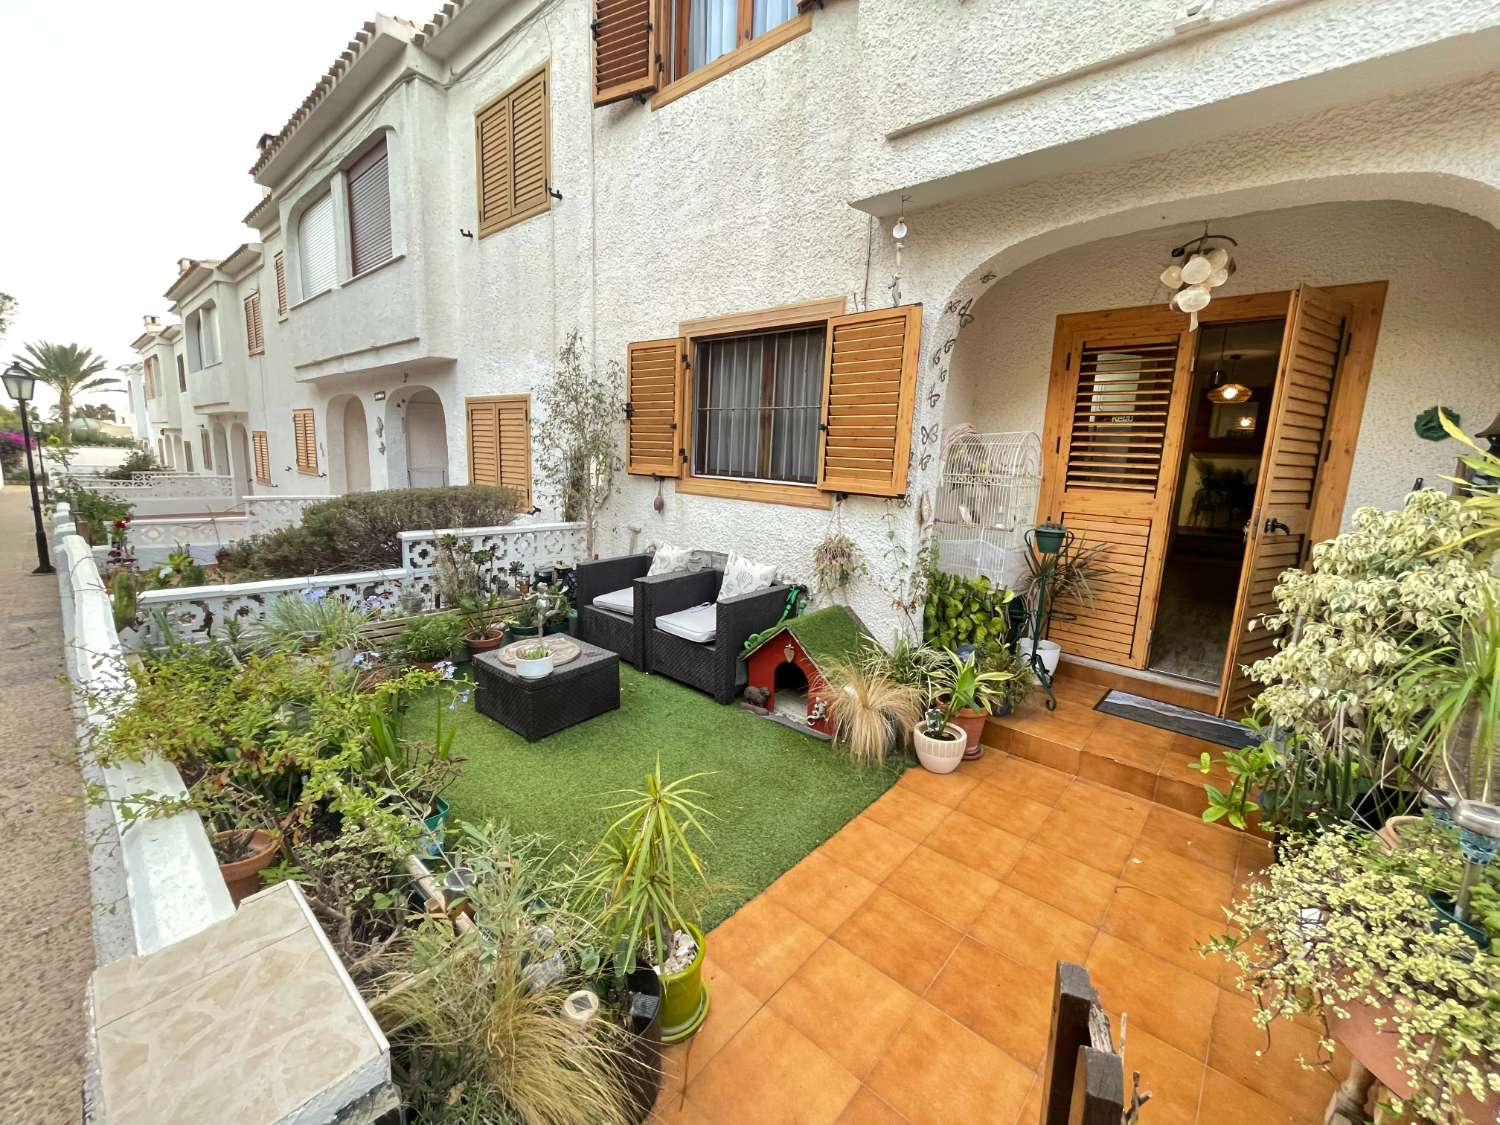 Beautiful and well located townhouse only 250 metres from the sea.